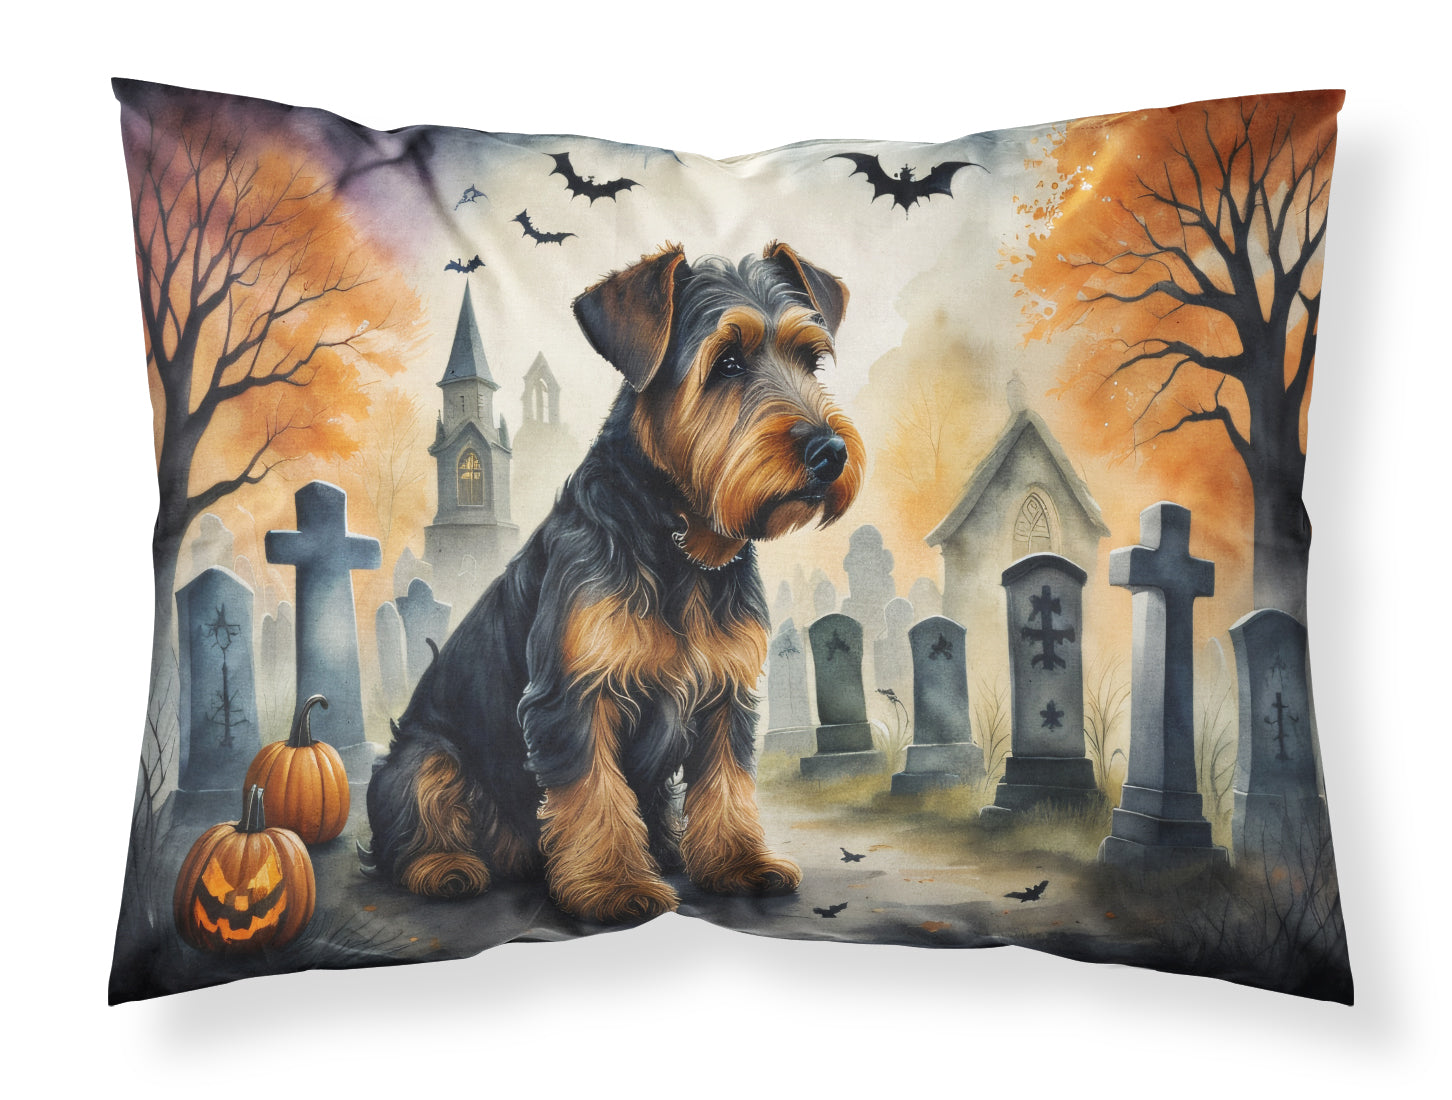 Buy this Airedale Terrier Spooky Halloween Fabric Standard Pillowcase